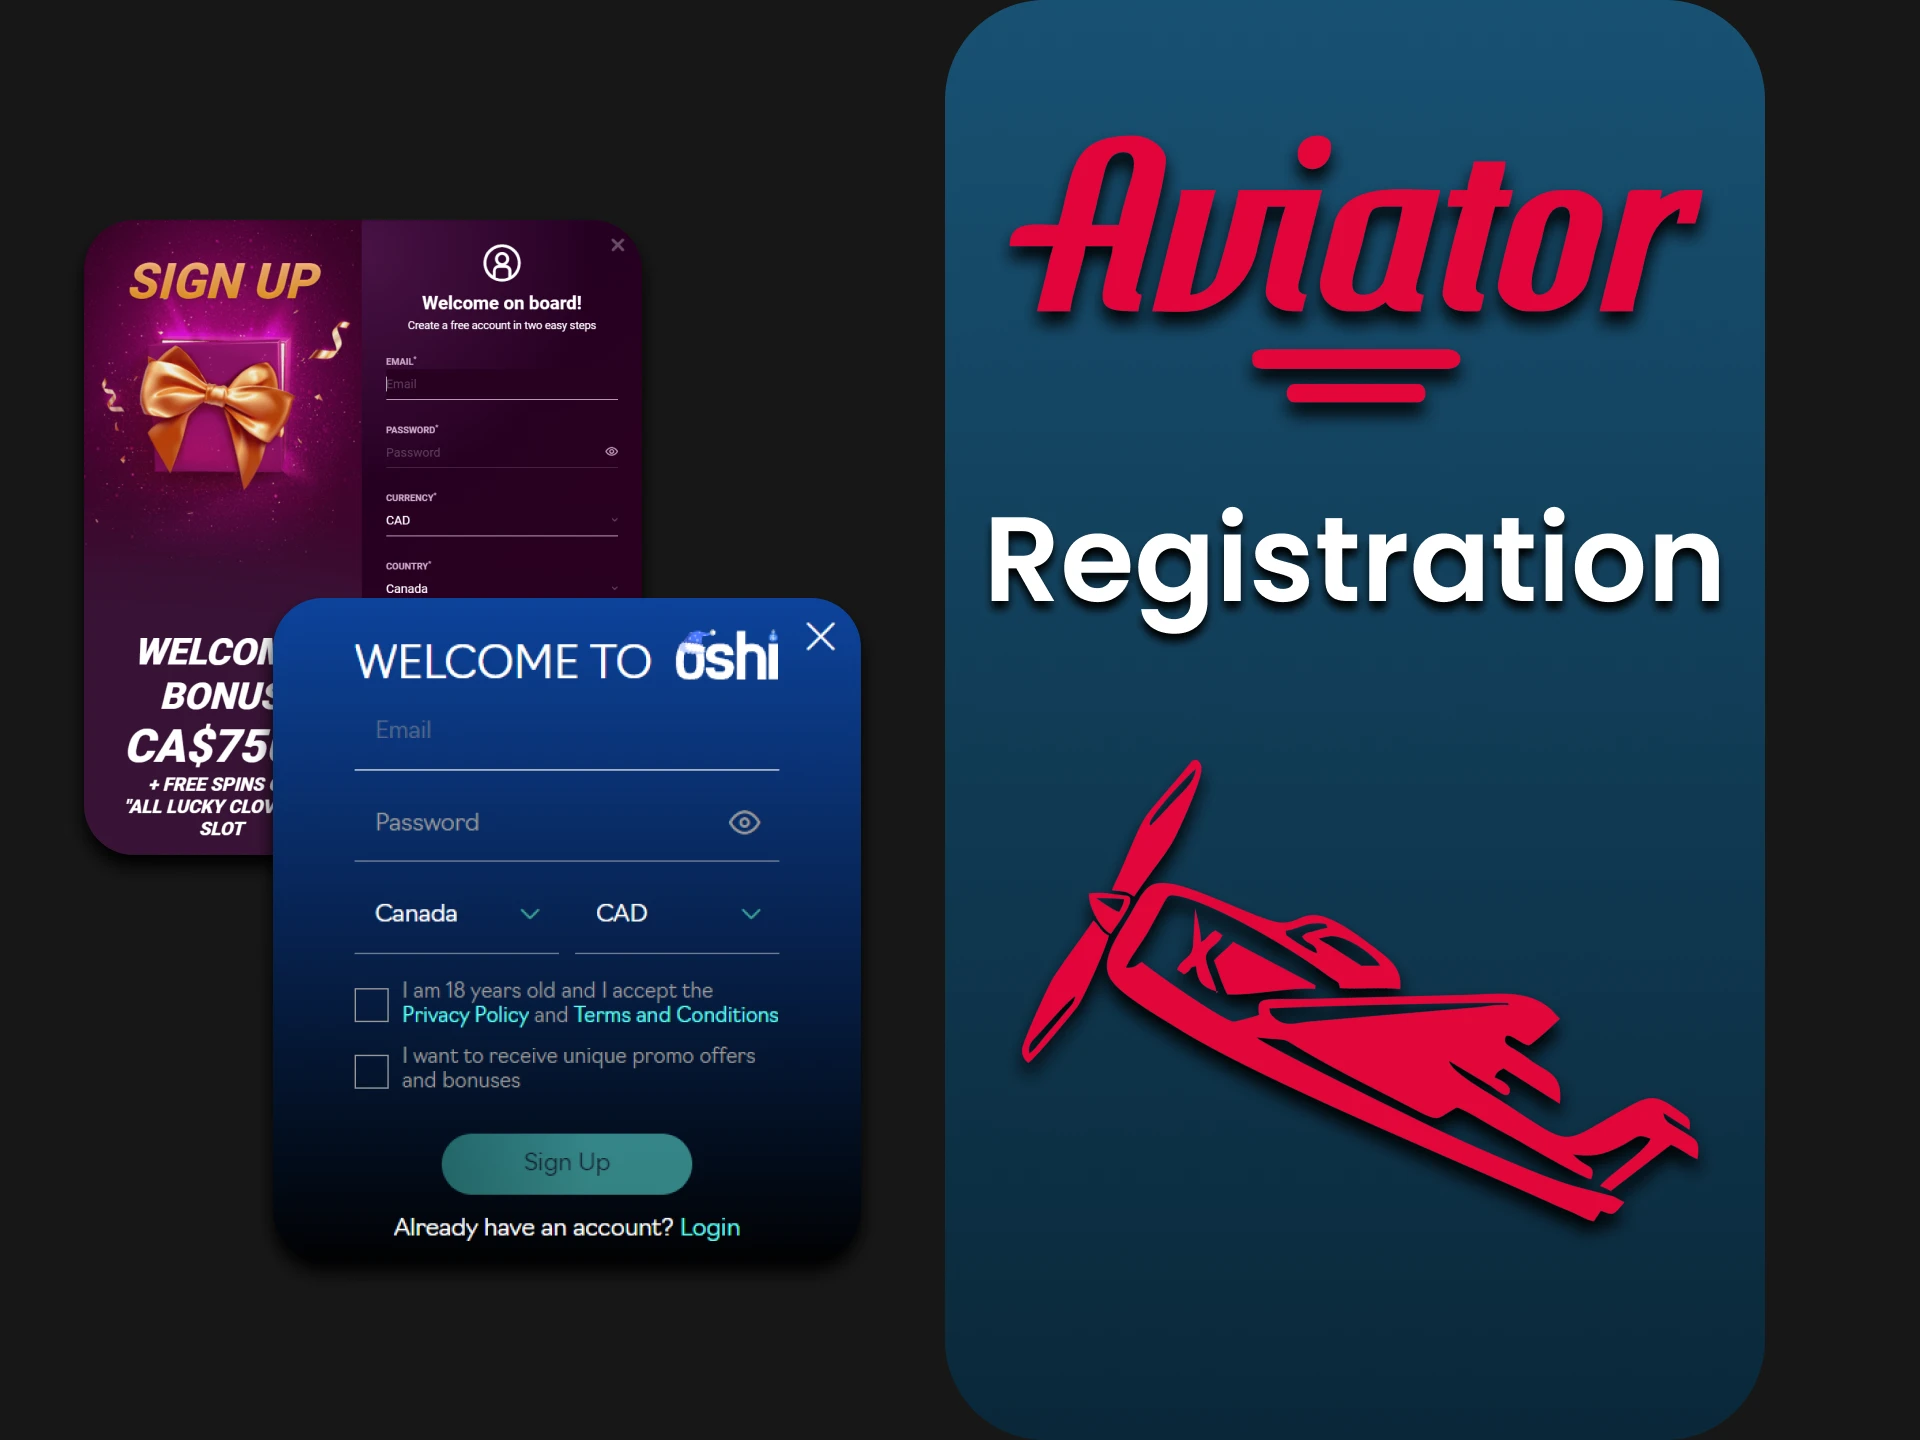 We will show you how to register on the site to play Aviator.